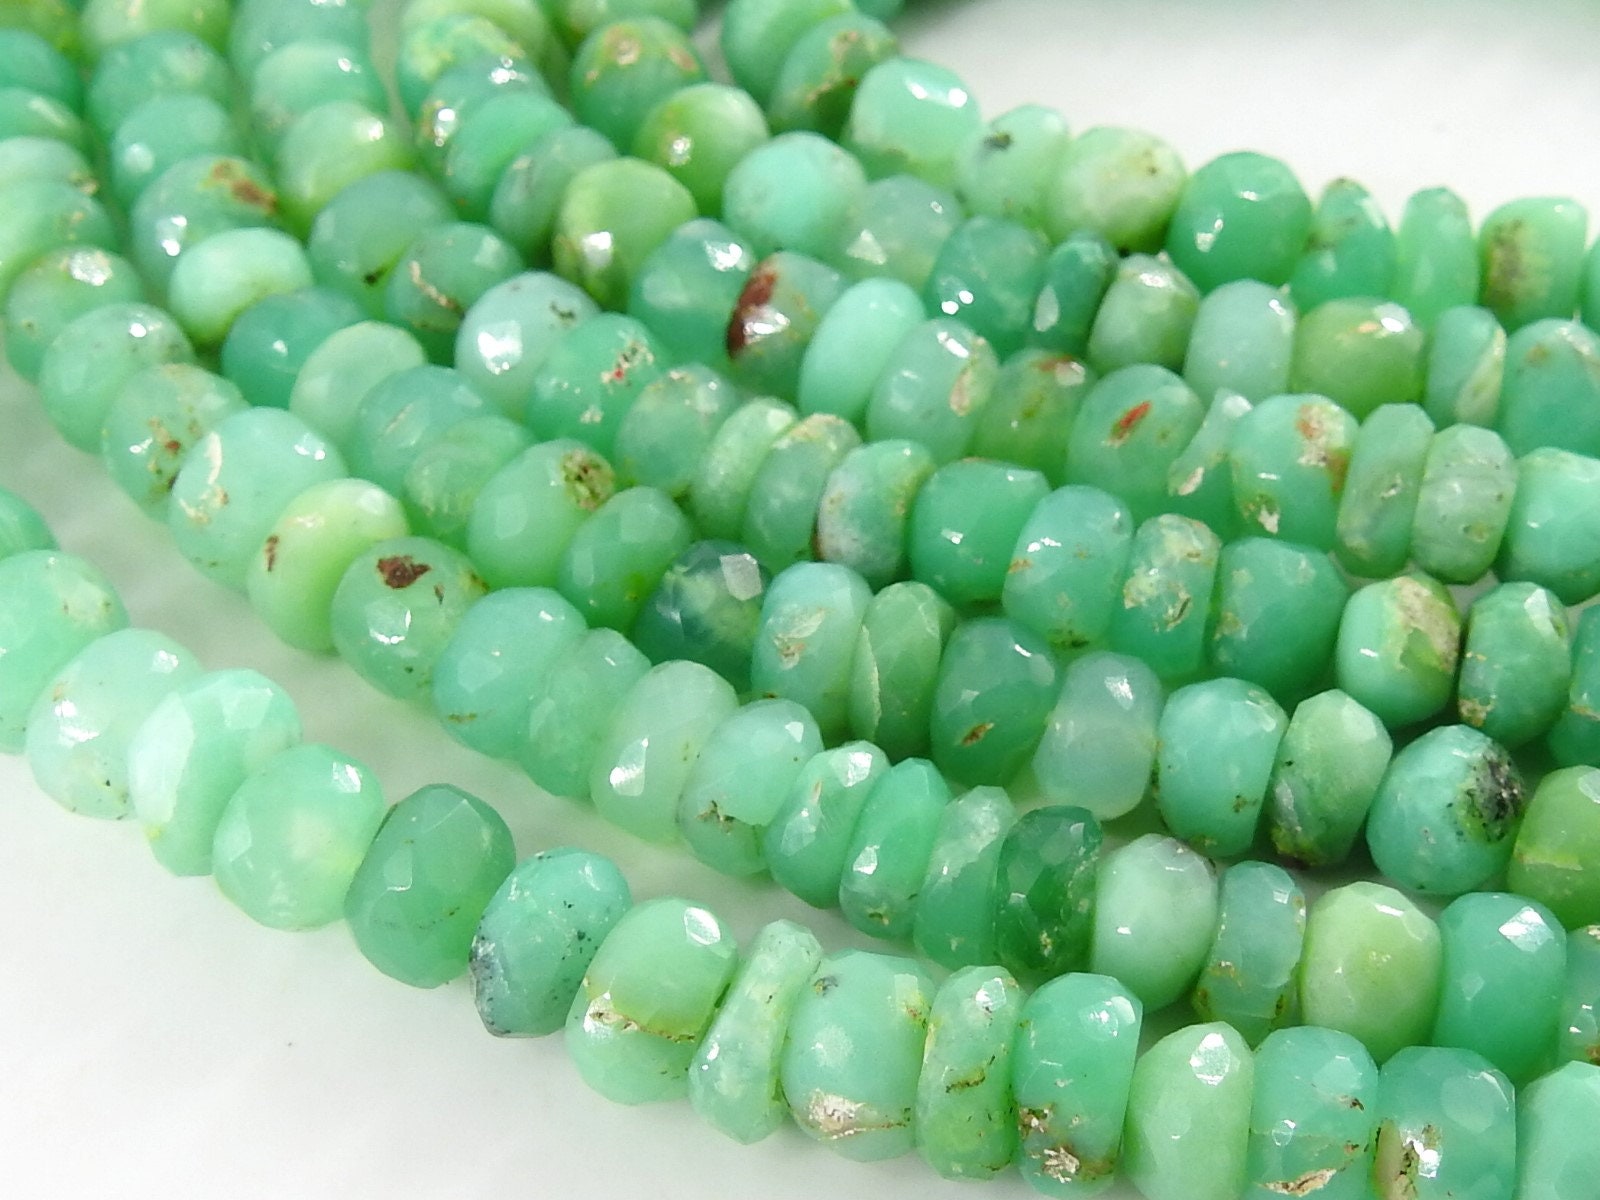 Chrysoprase Faceted Roundel Beads,Handmade,Loose Stone,For Making Jewelry,Necklace,Wholesaler,Supplies,13Inch 7X8MM,100%Natural PME-B4 | Save 33% - Rajasthan Living 15